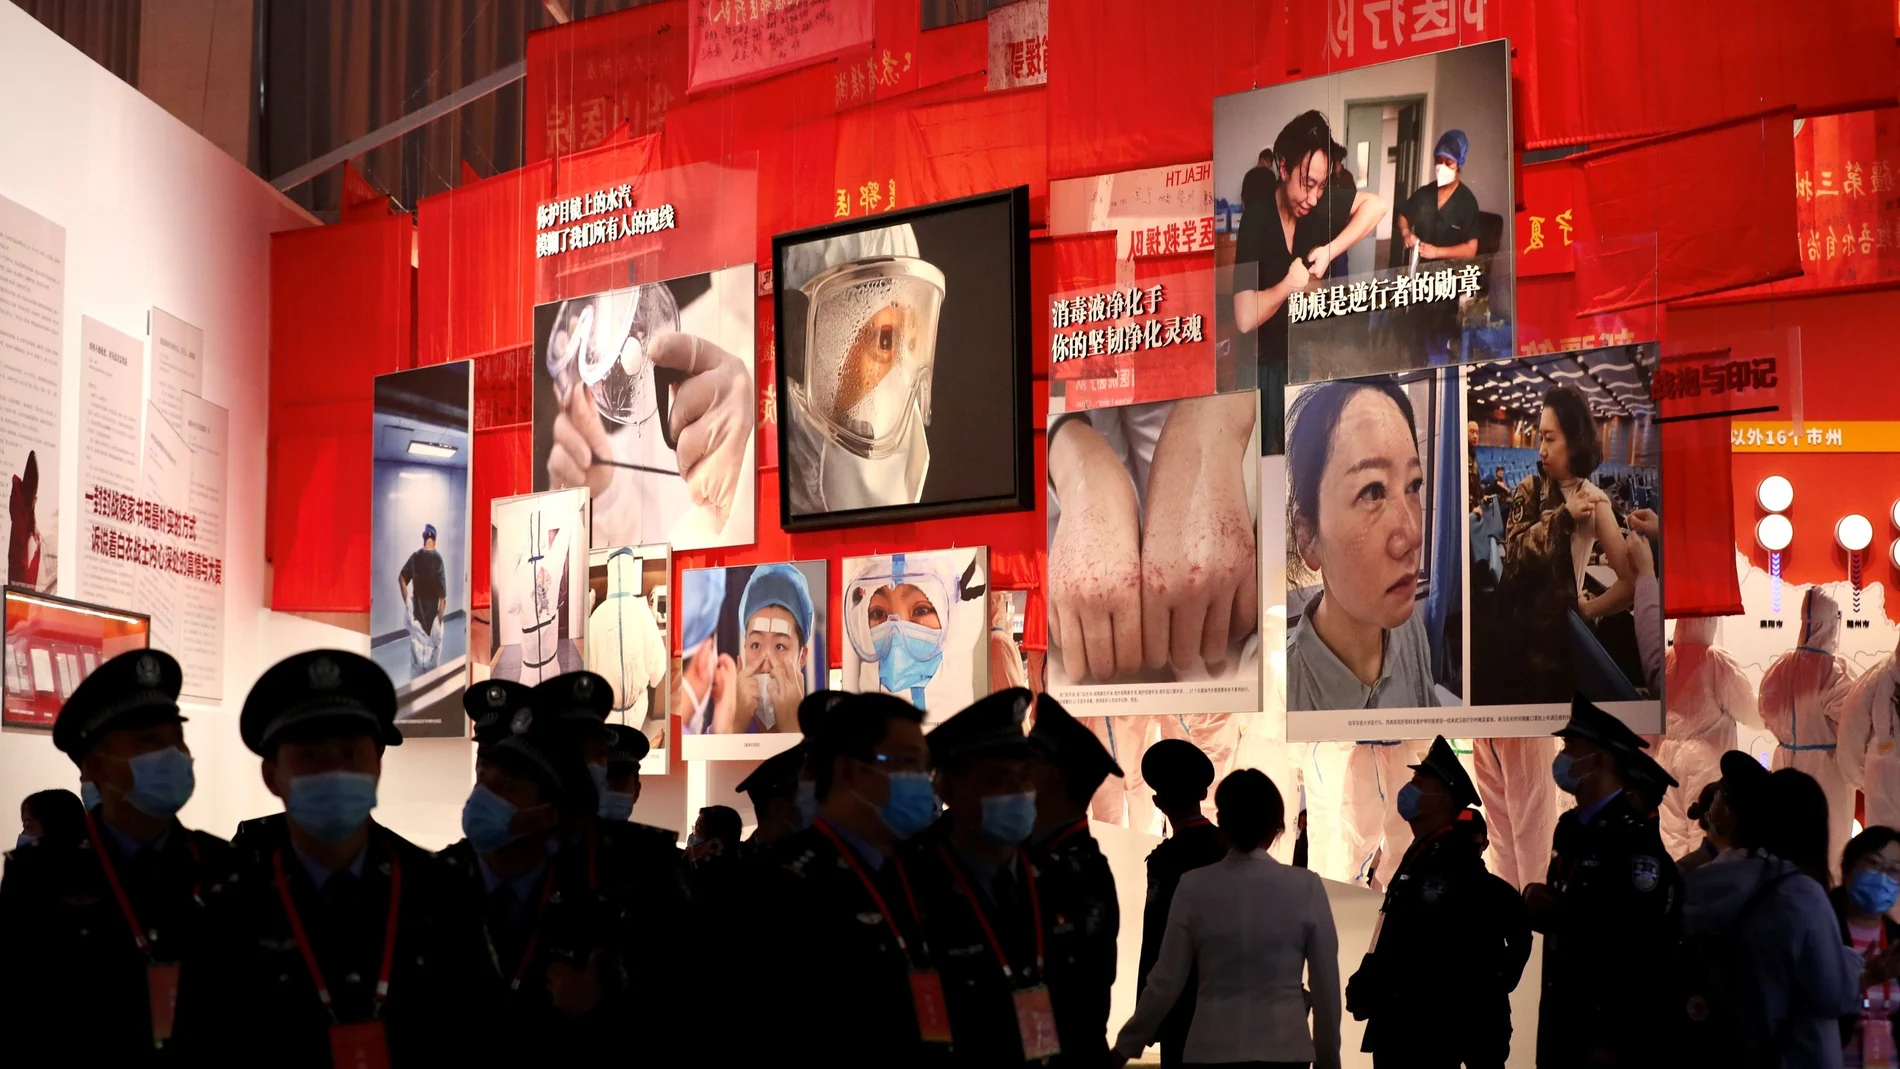 Visitors are seen at a newly opened exhibition on Wuhan's fight against the coronavirus disease (COVID-19) outbreak, at an exhibition centre in Wuhan, Hubei province, China October 15, 2020. China Daily via REUTERS ATTENTION EDITORS - THIS IMAGE WAS PROVIDED BY A THIRD PARTY. CHINA OUT.